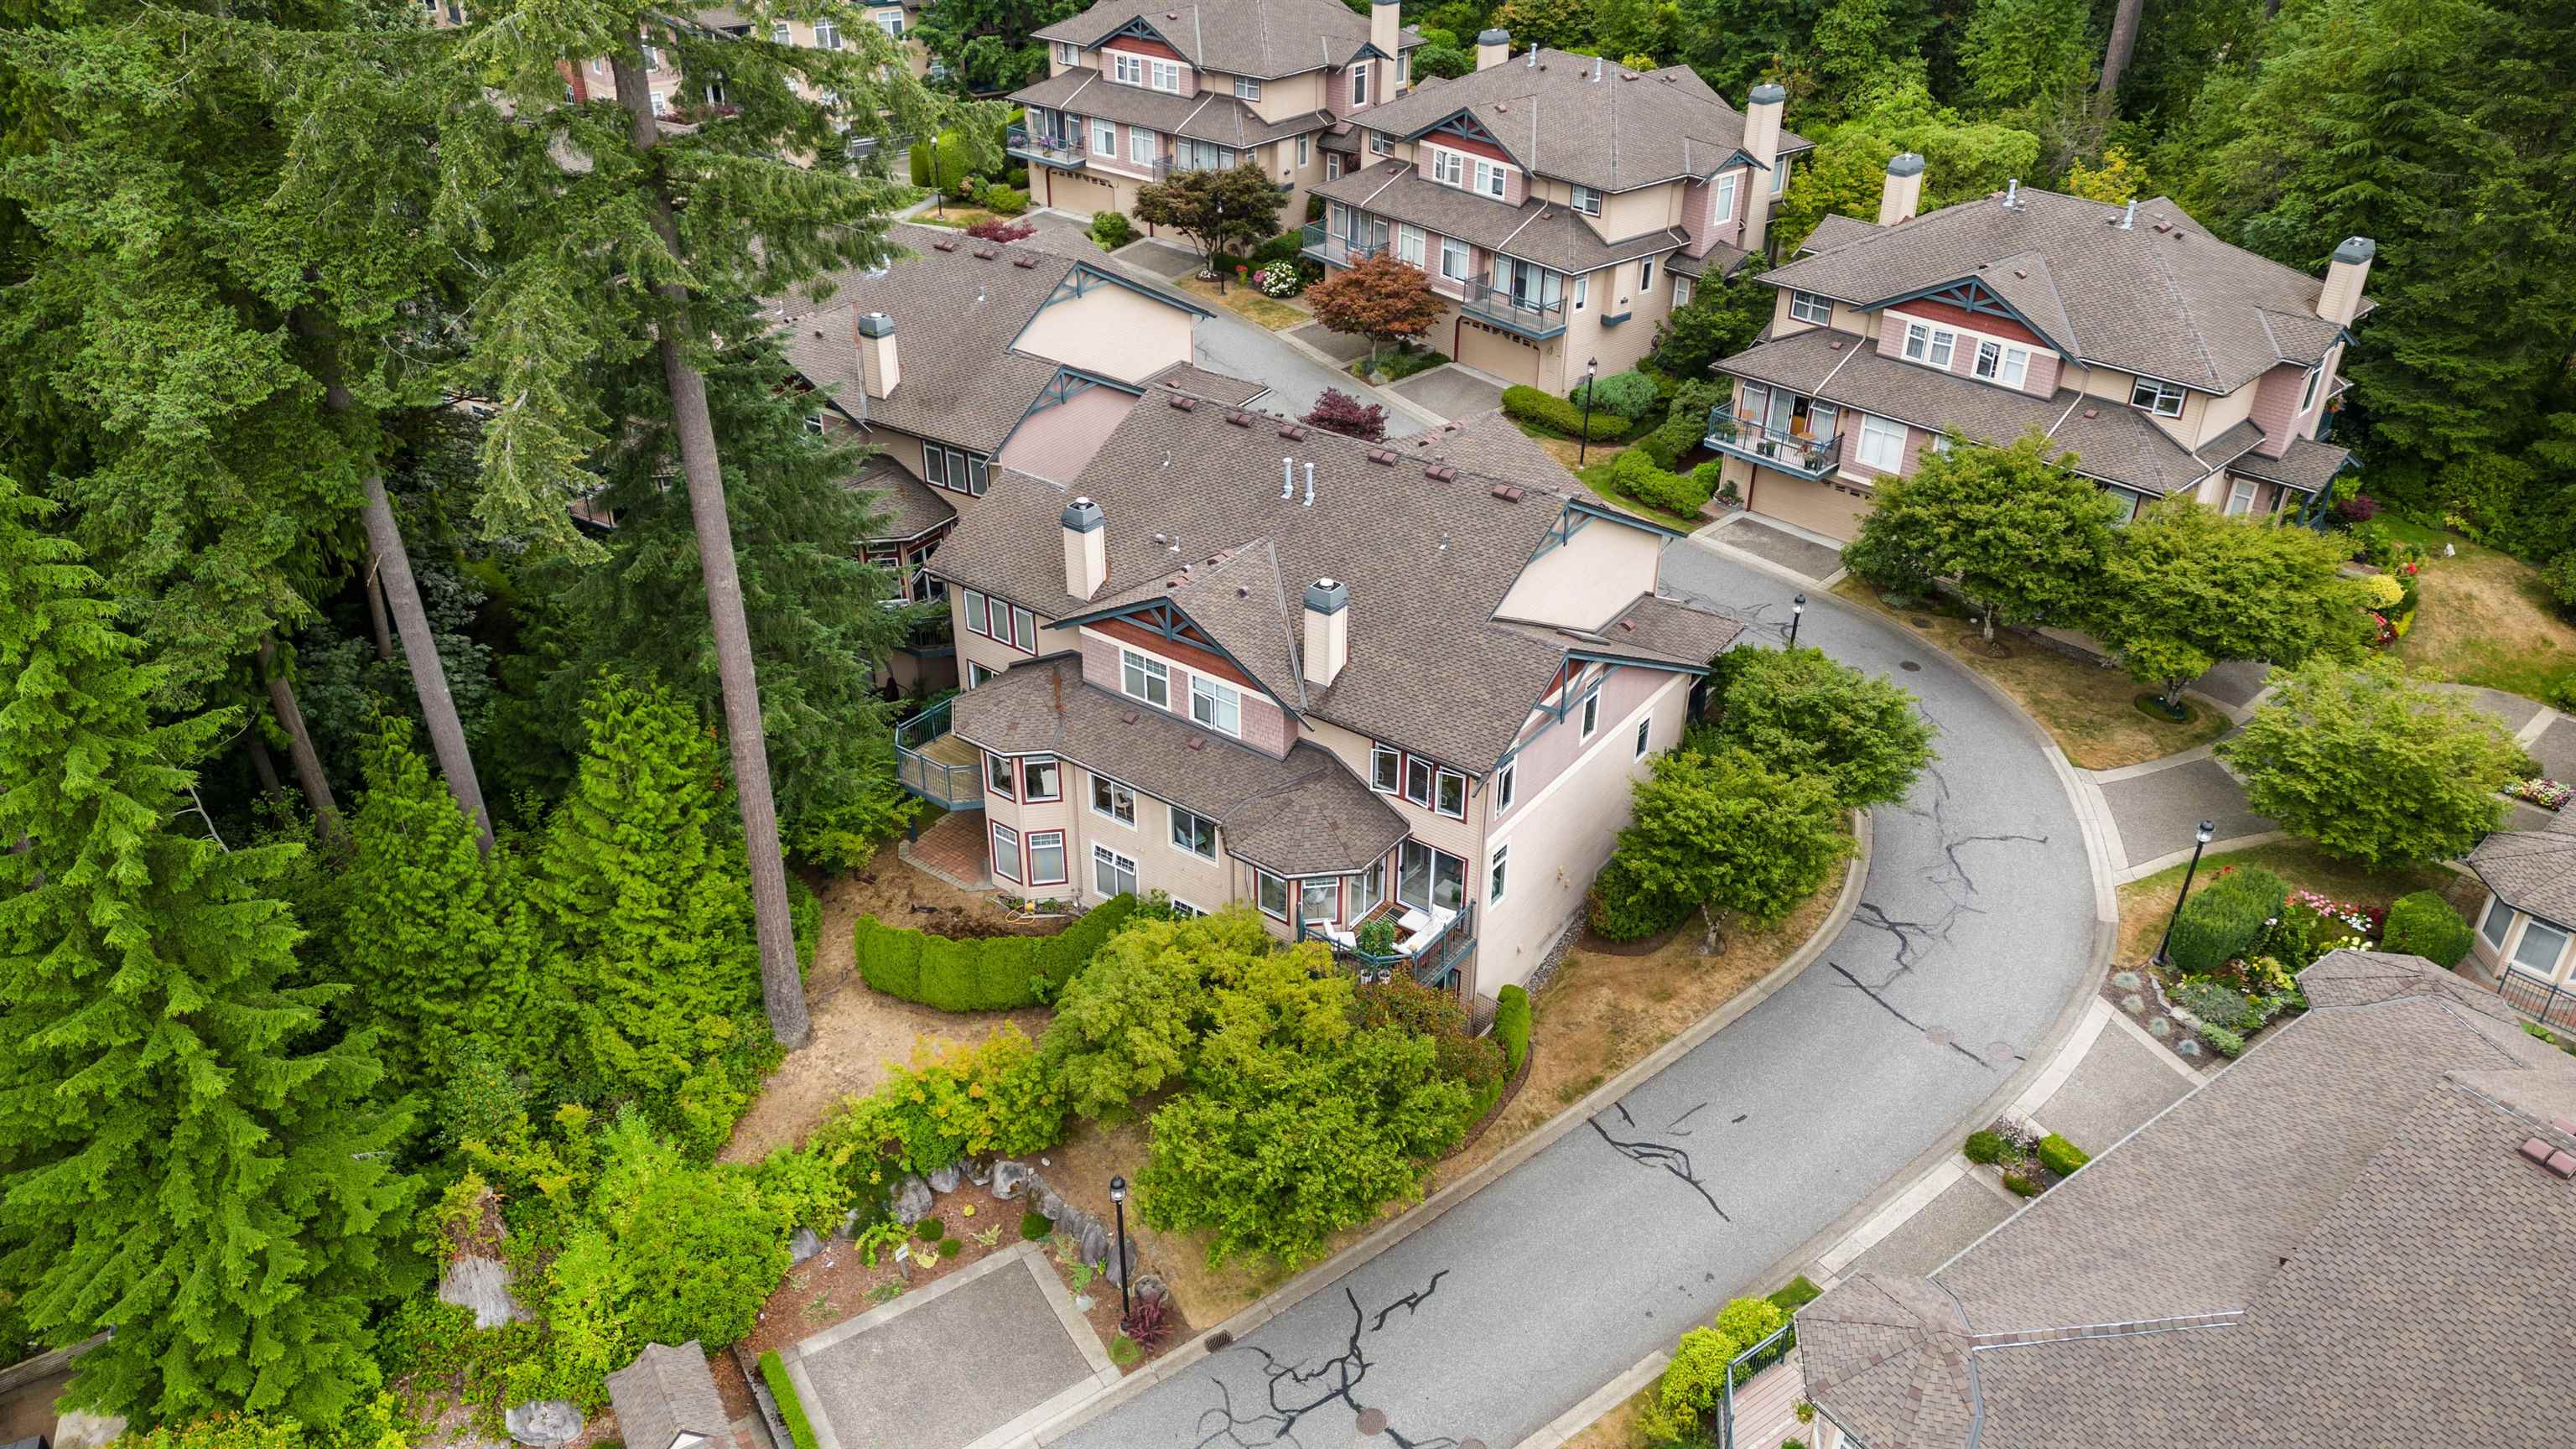 Listing image of 1120 STRATHAVEN DRIVE